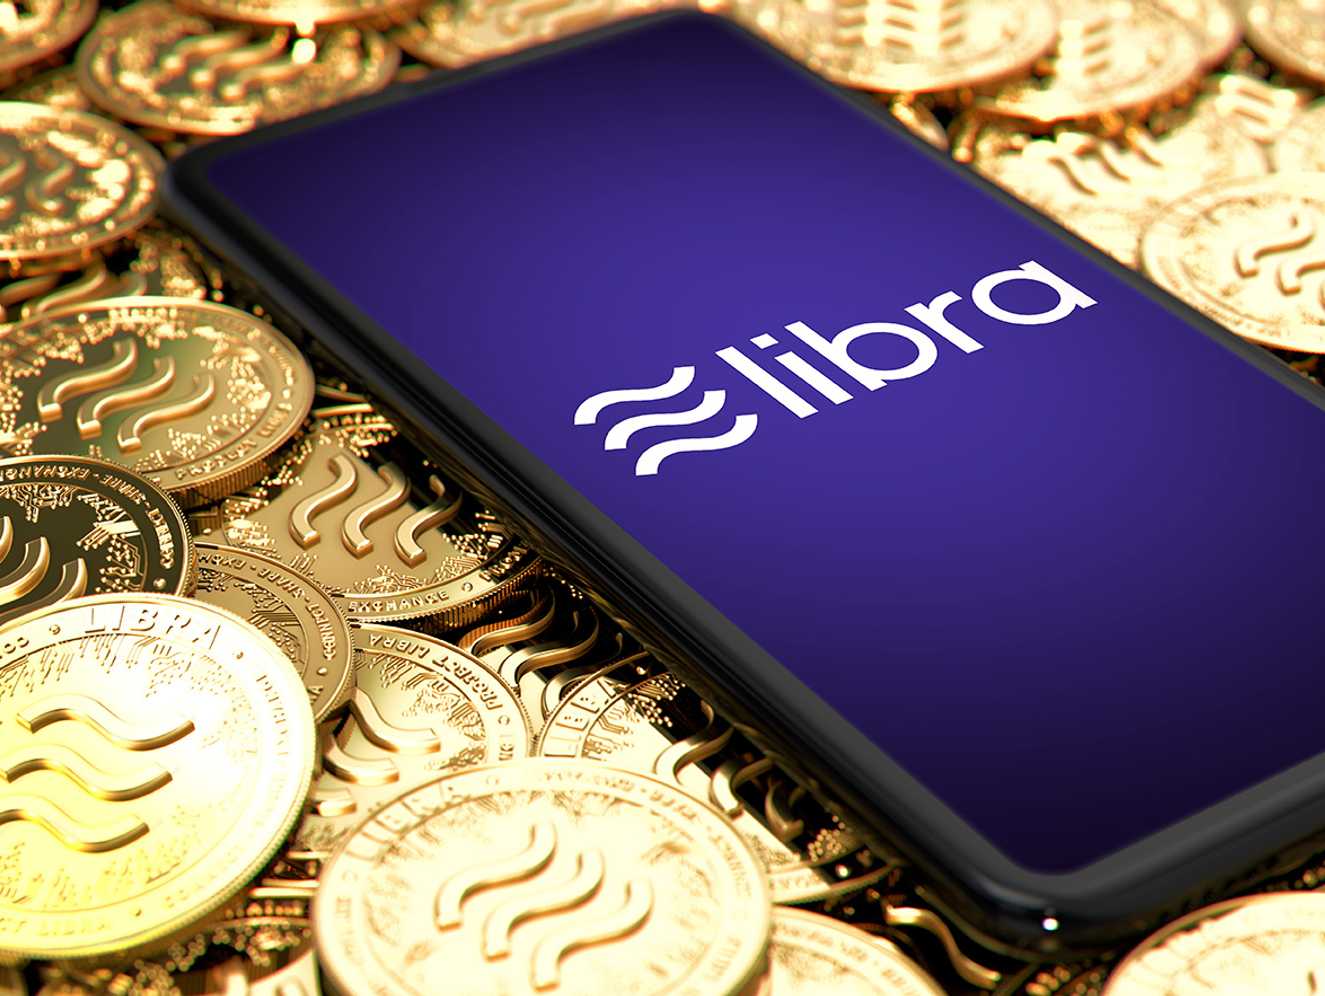 Do The Stars Align For Facebook's Libra Currency?